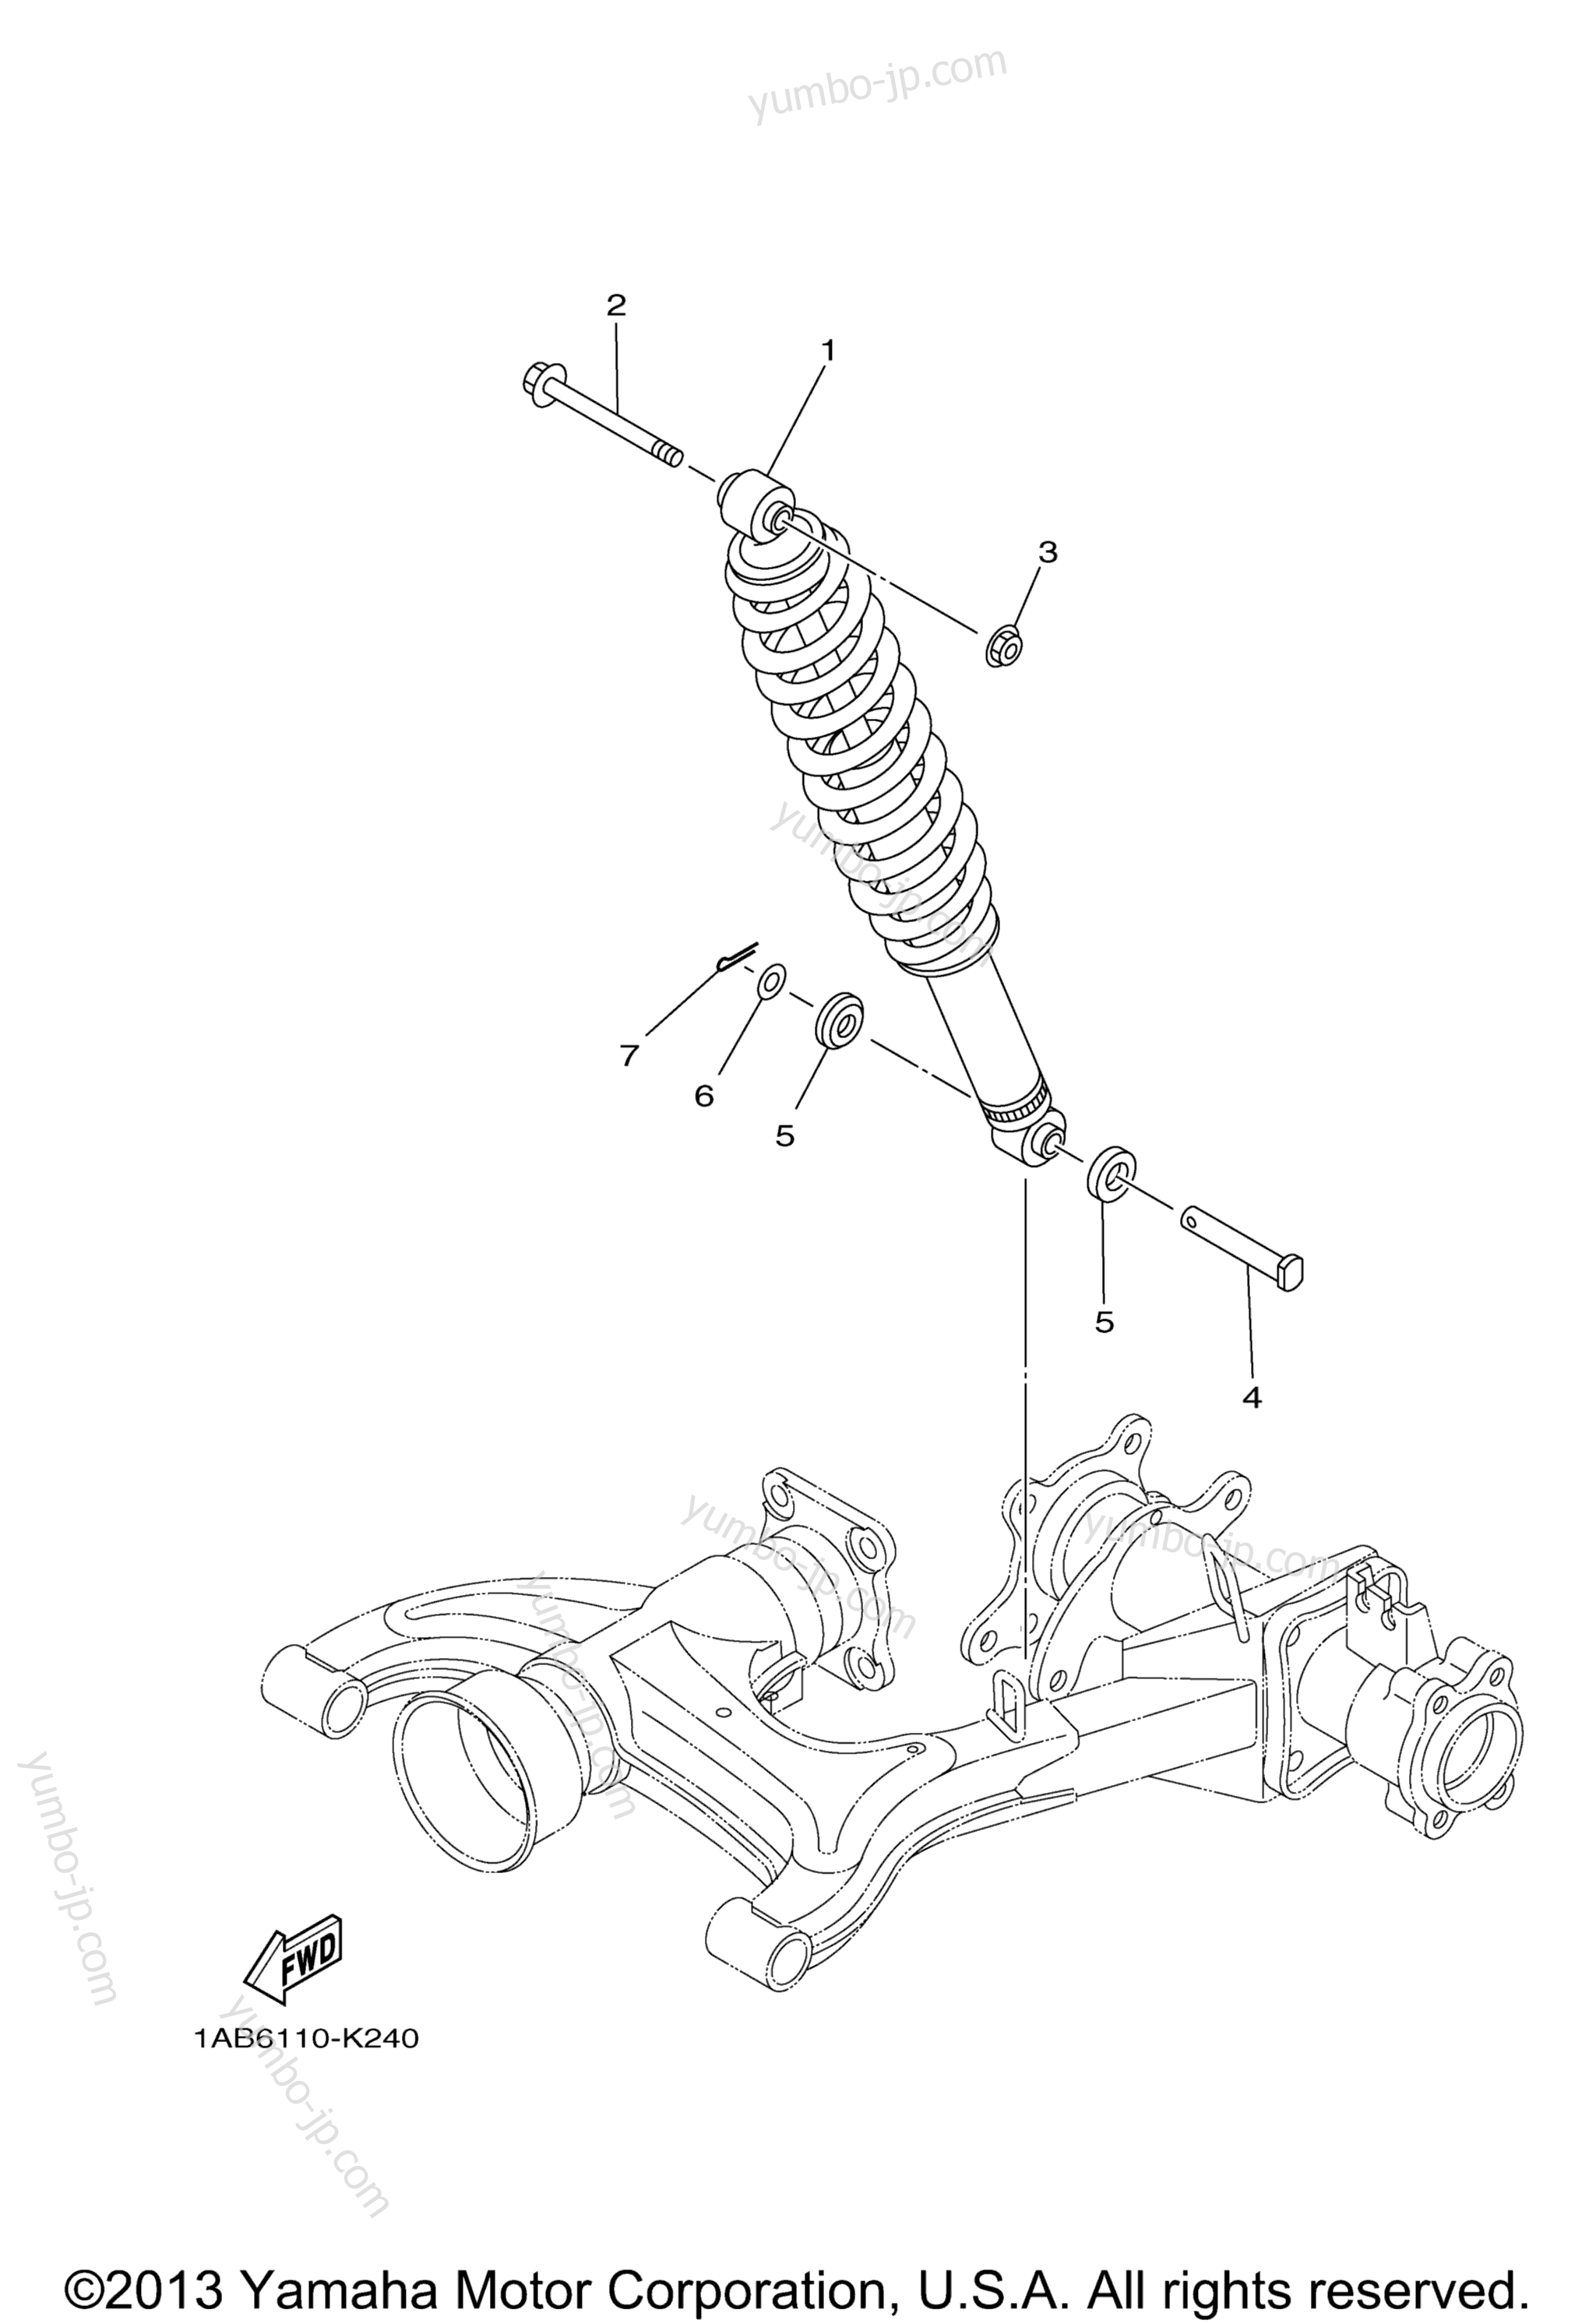 Rear Suspension for ATVs YAMAHA GRIZZLY 350 4WD (YFM35FGAL) 2011 year